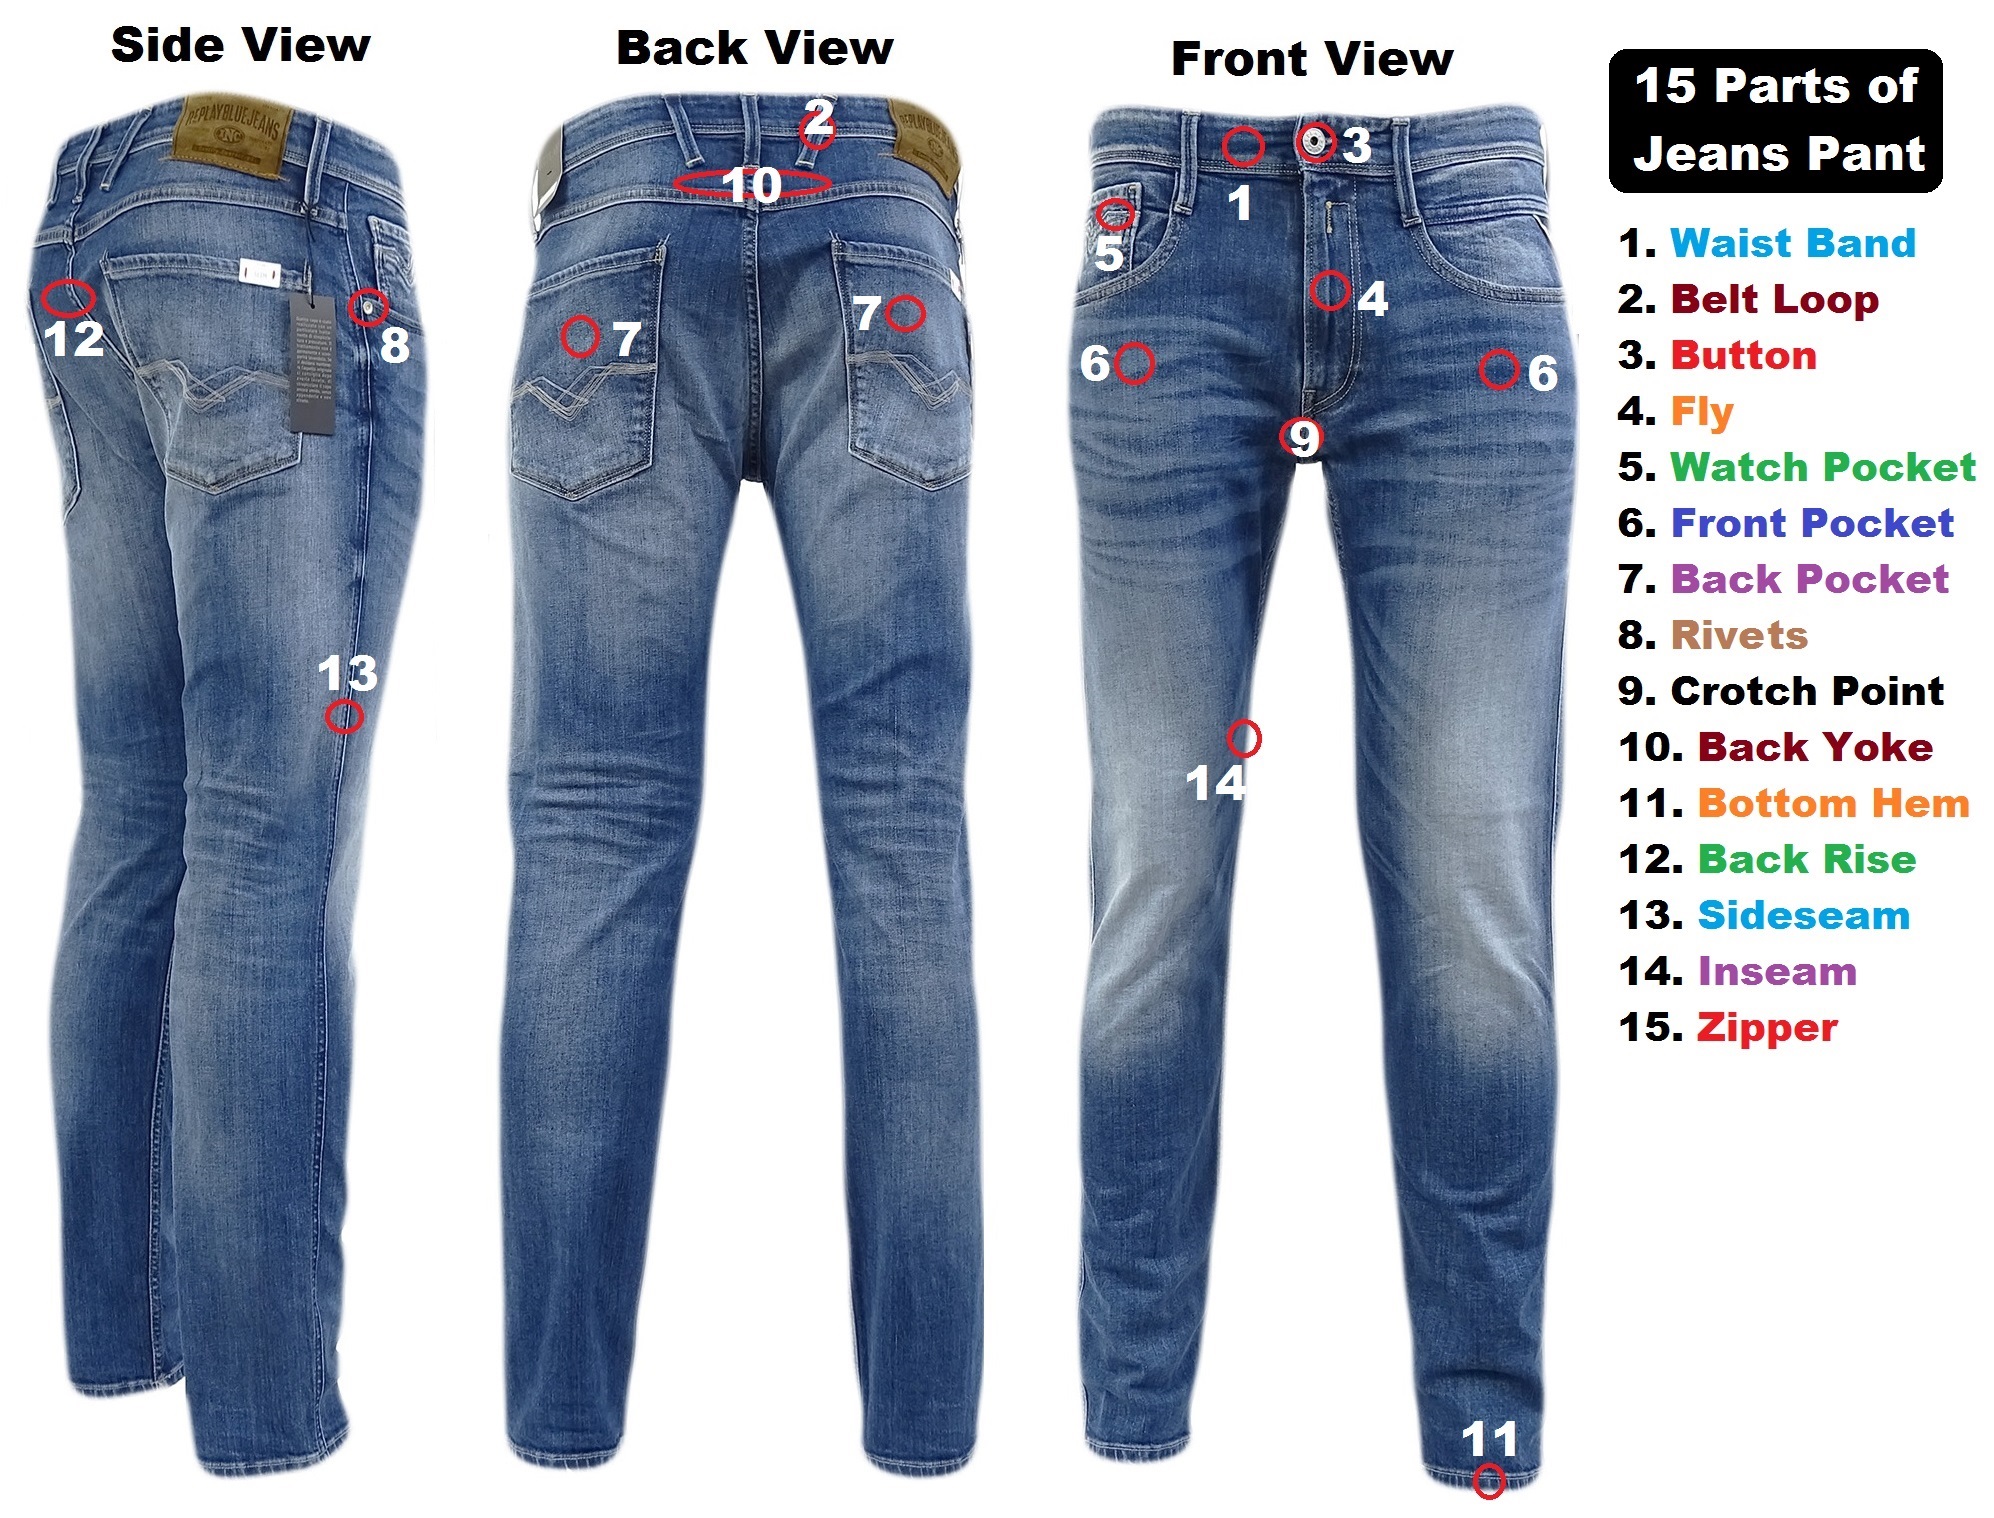 different-parts-of-jeans-pant-ordnur-textile-and-finance